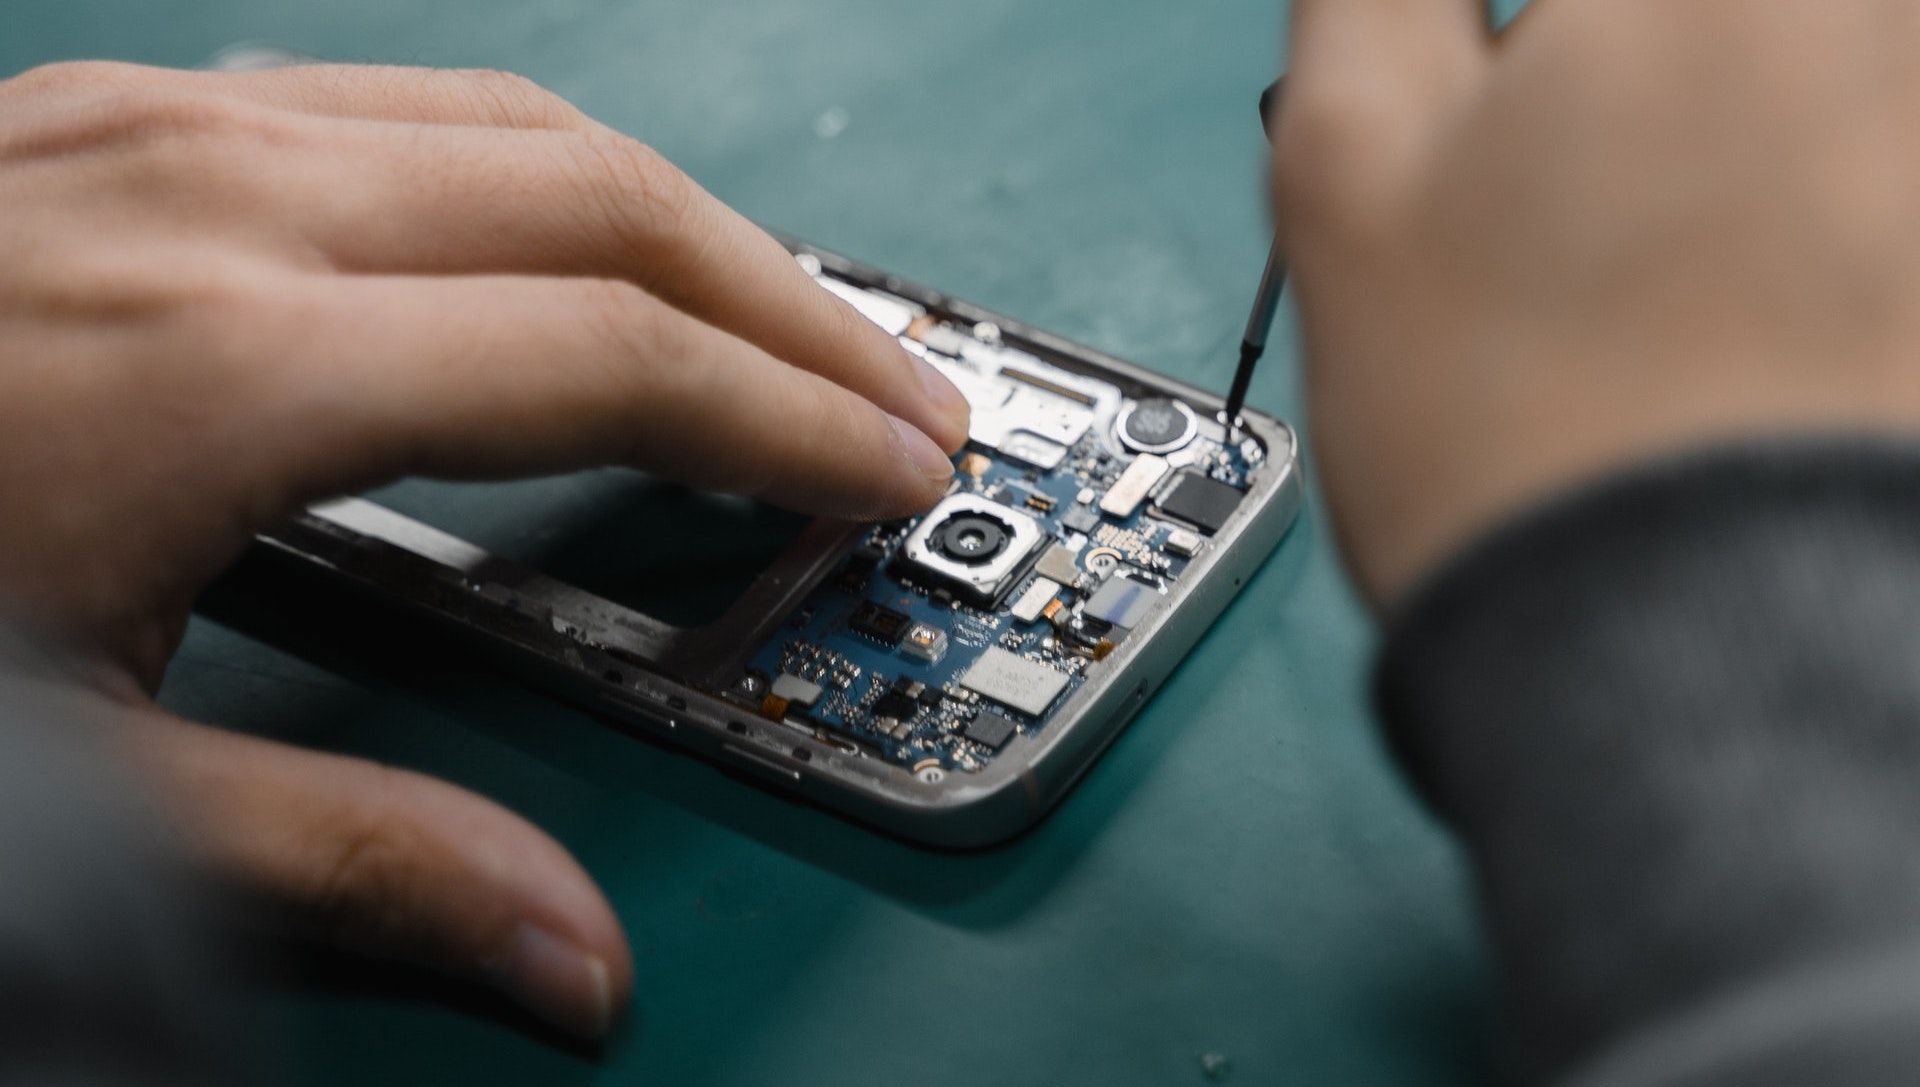 A close up shot of a samsung phone with exposed electronics being repaired